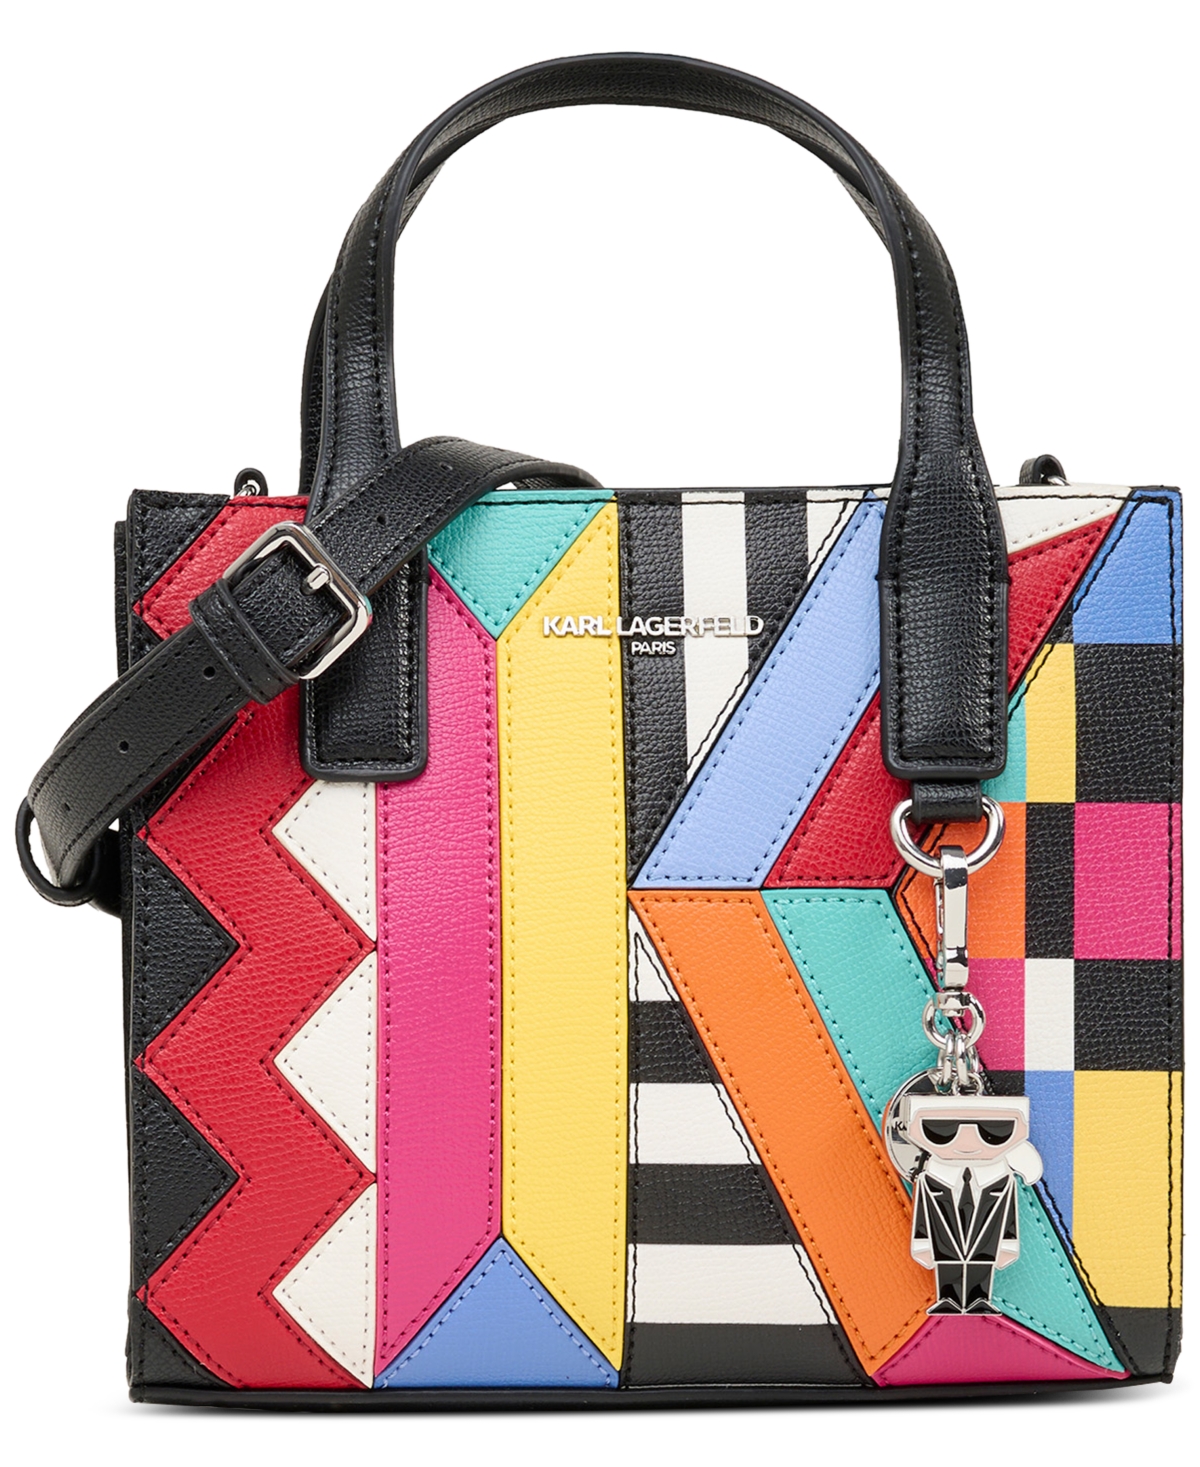 Karl Lagerfeld Nouveau Small Colorblocked Tote In Patchwork Combo